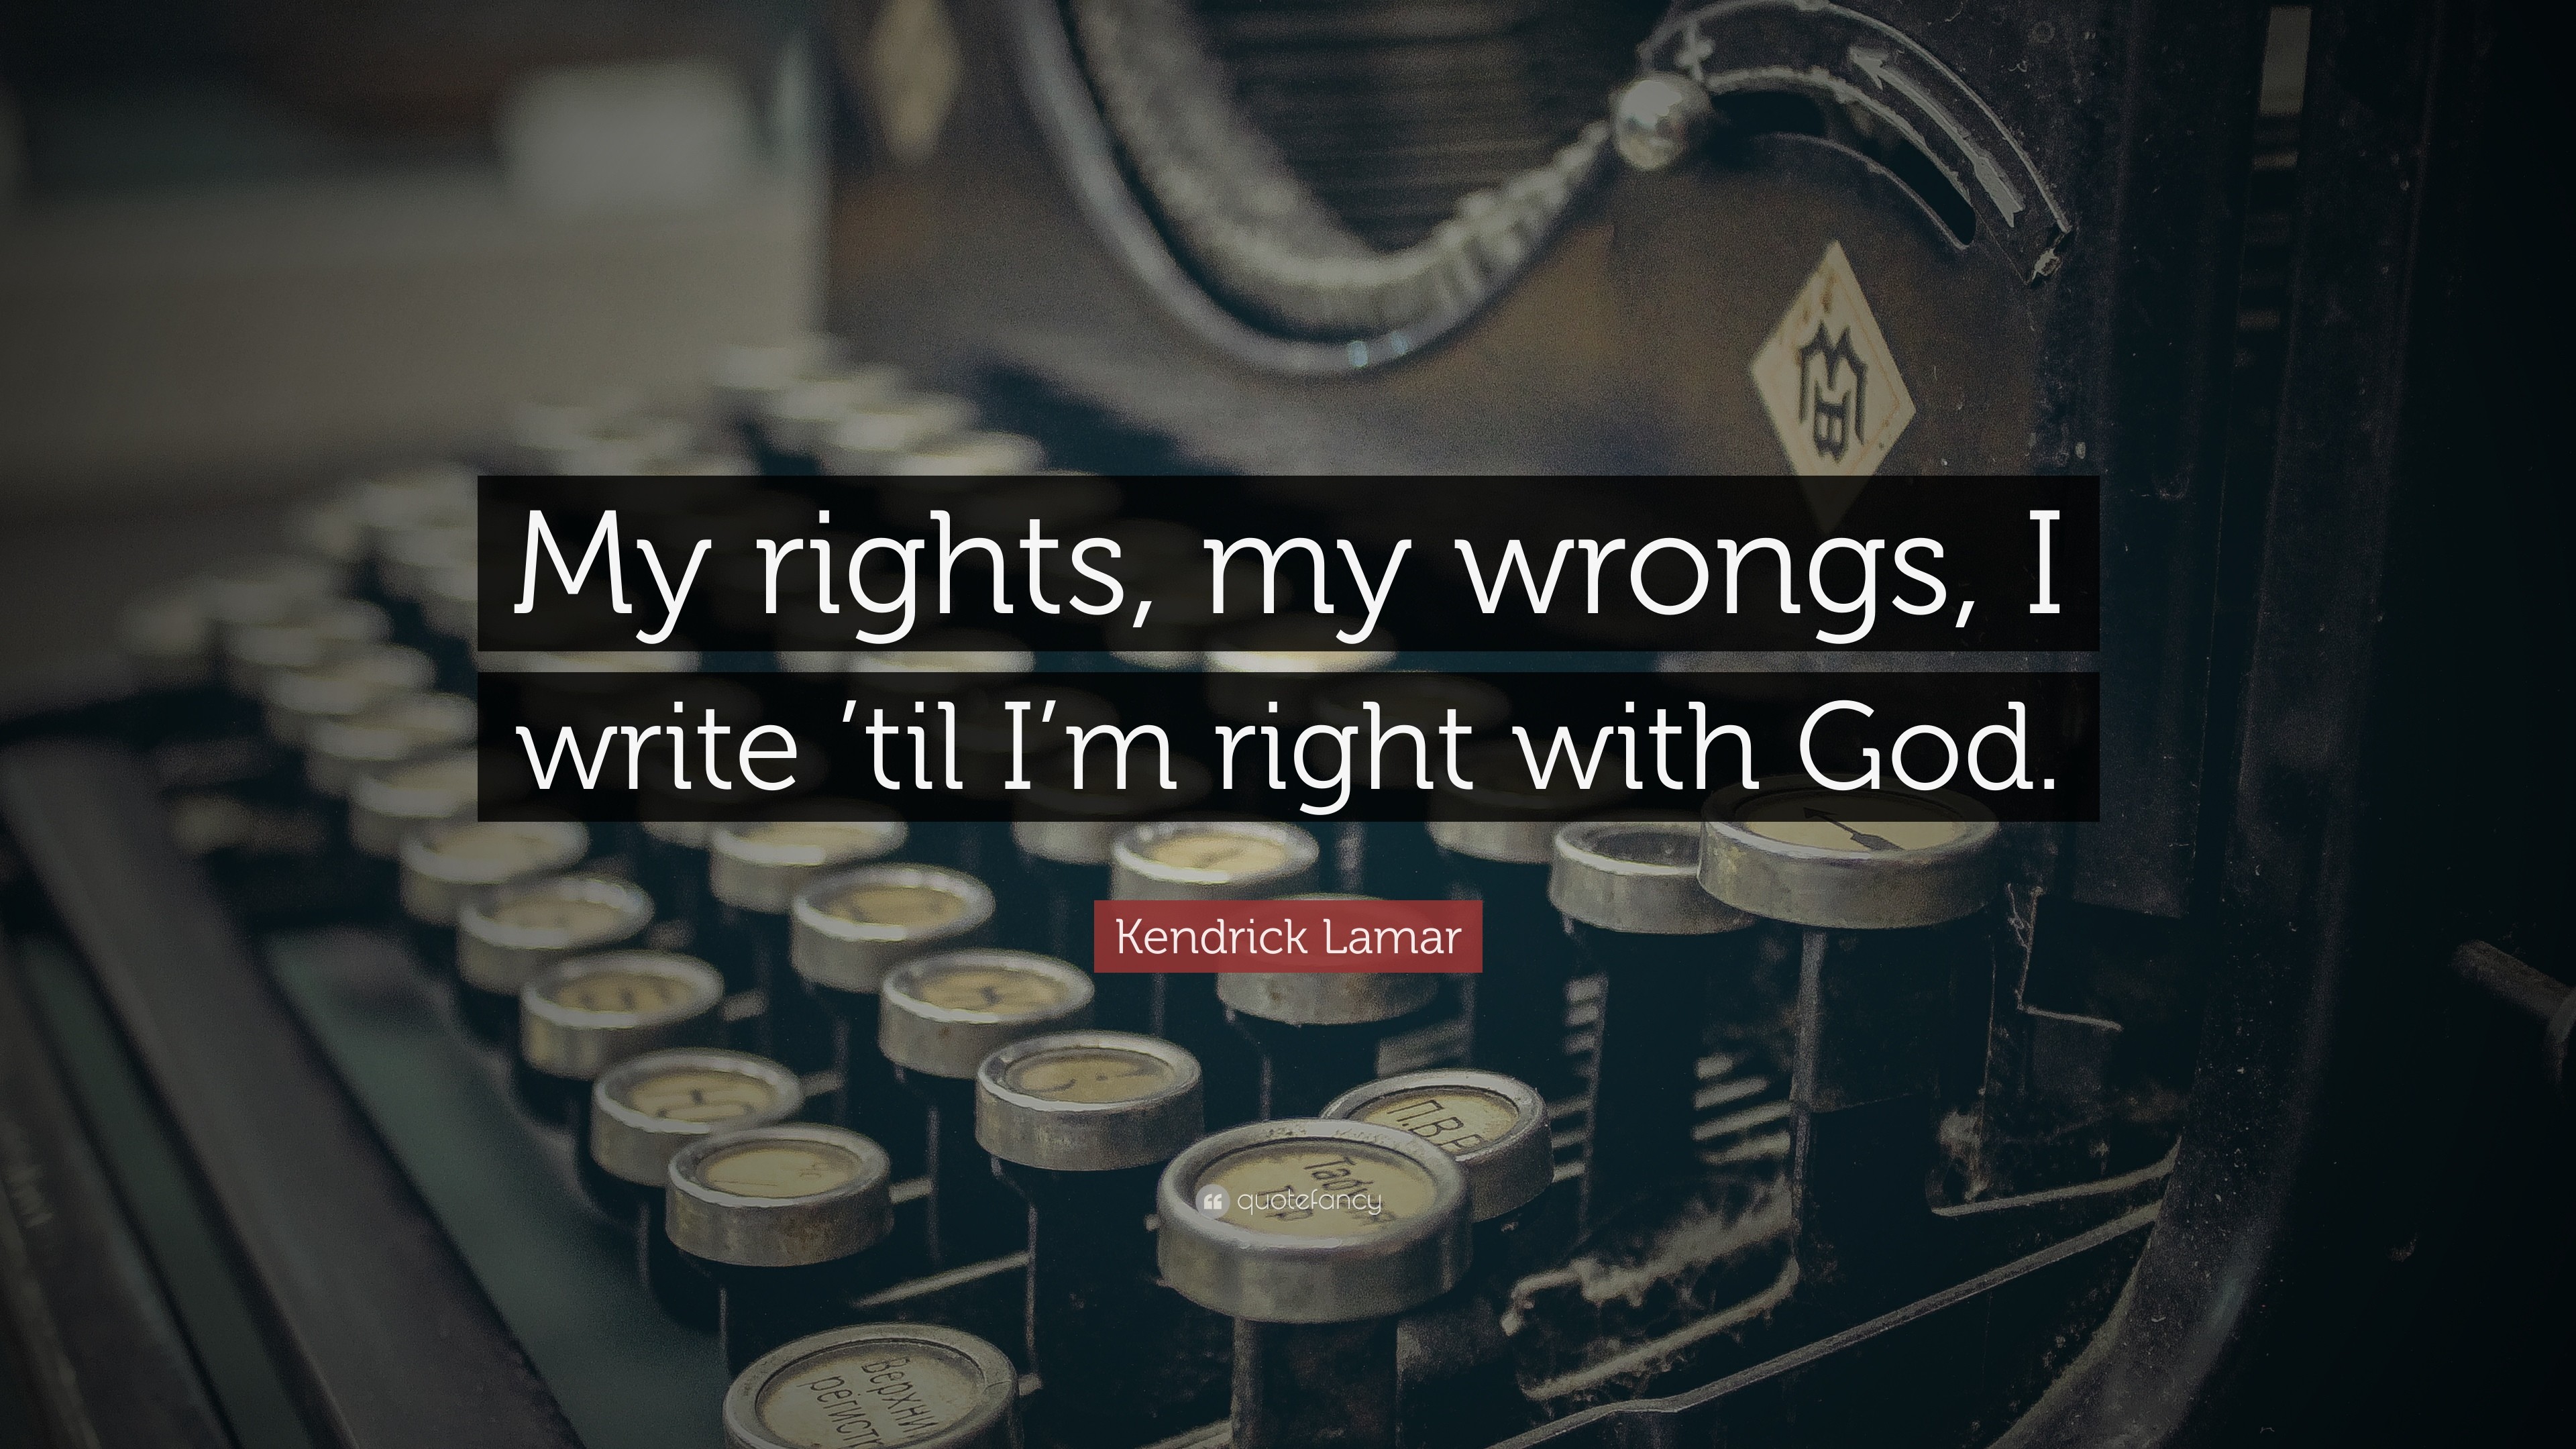 3840x2160 Kendrick Lamar Quote: “My rights, my wrongs, I write 'til I